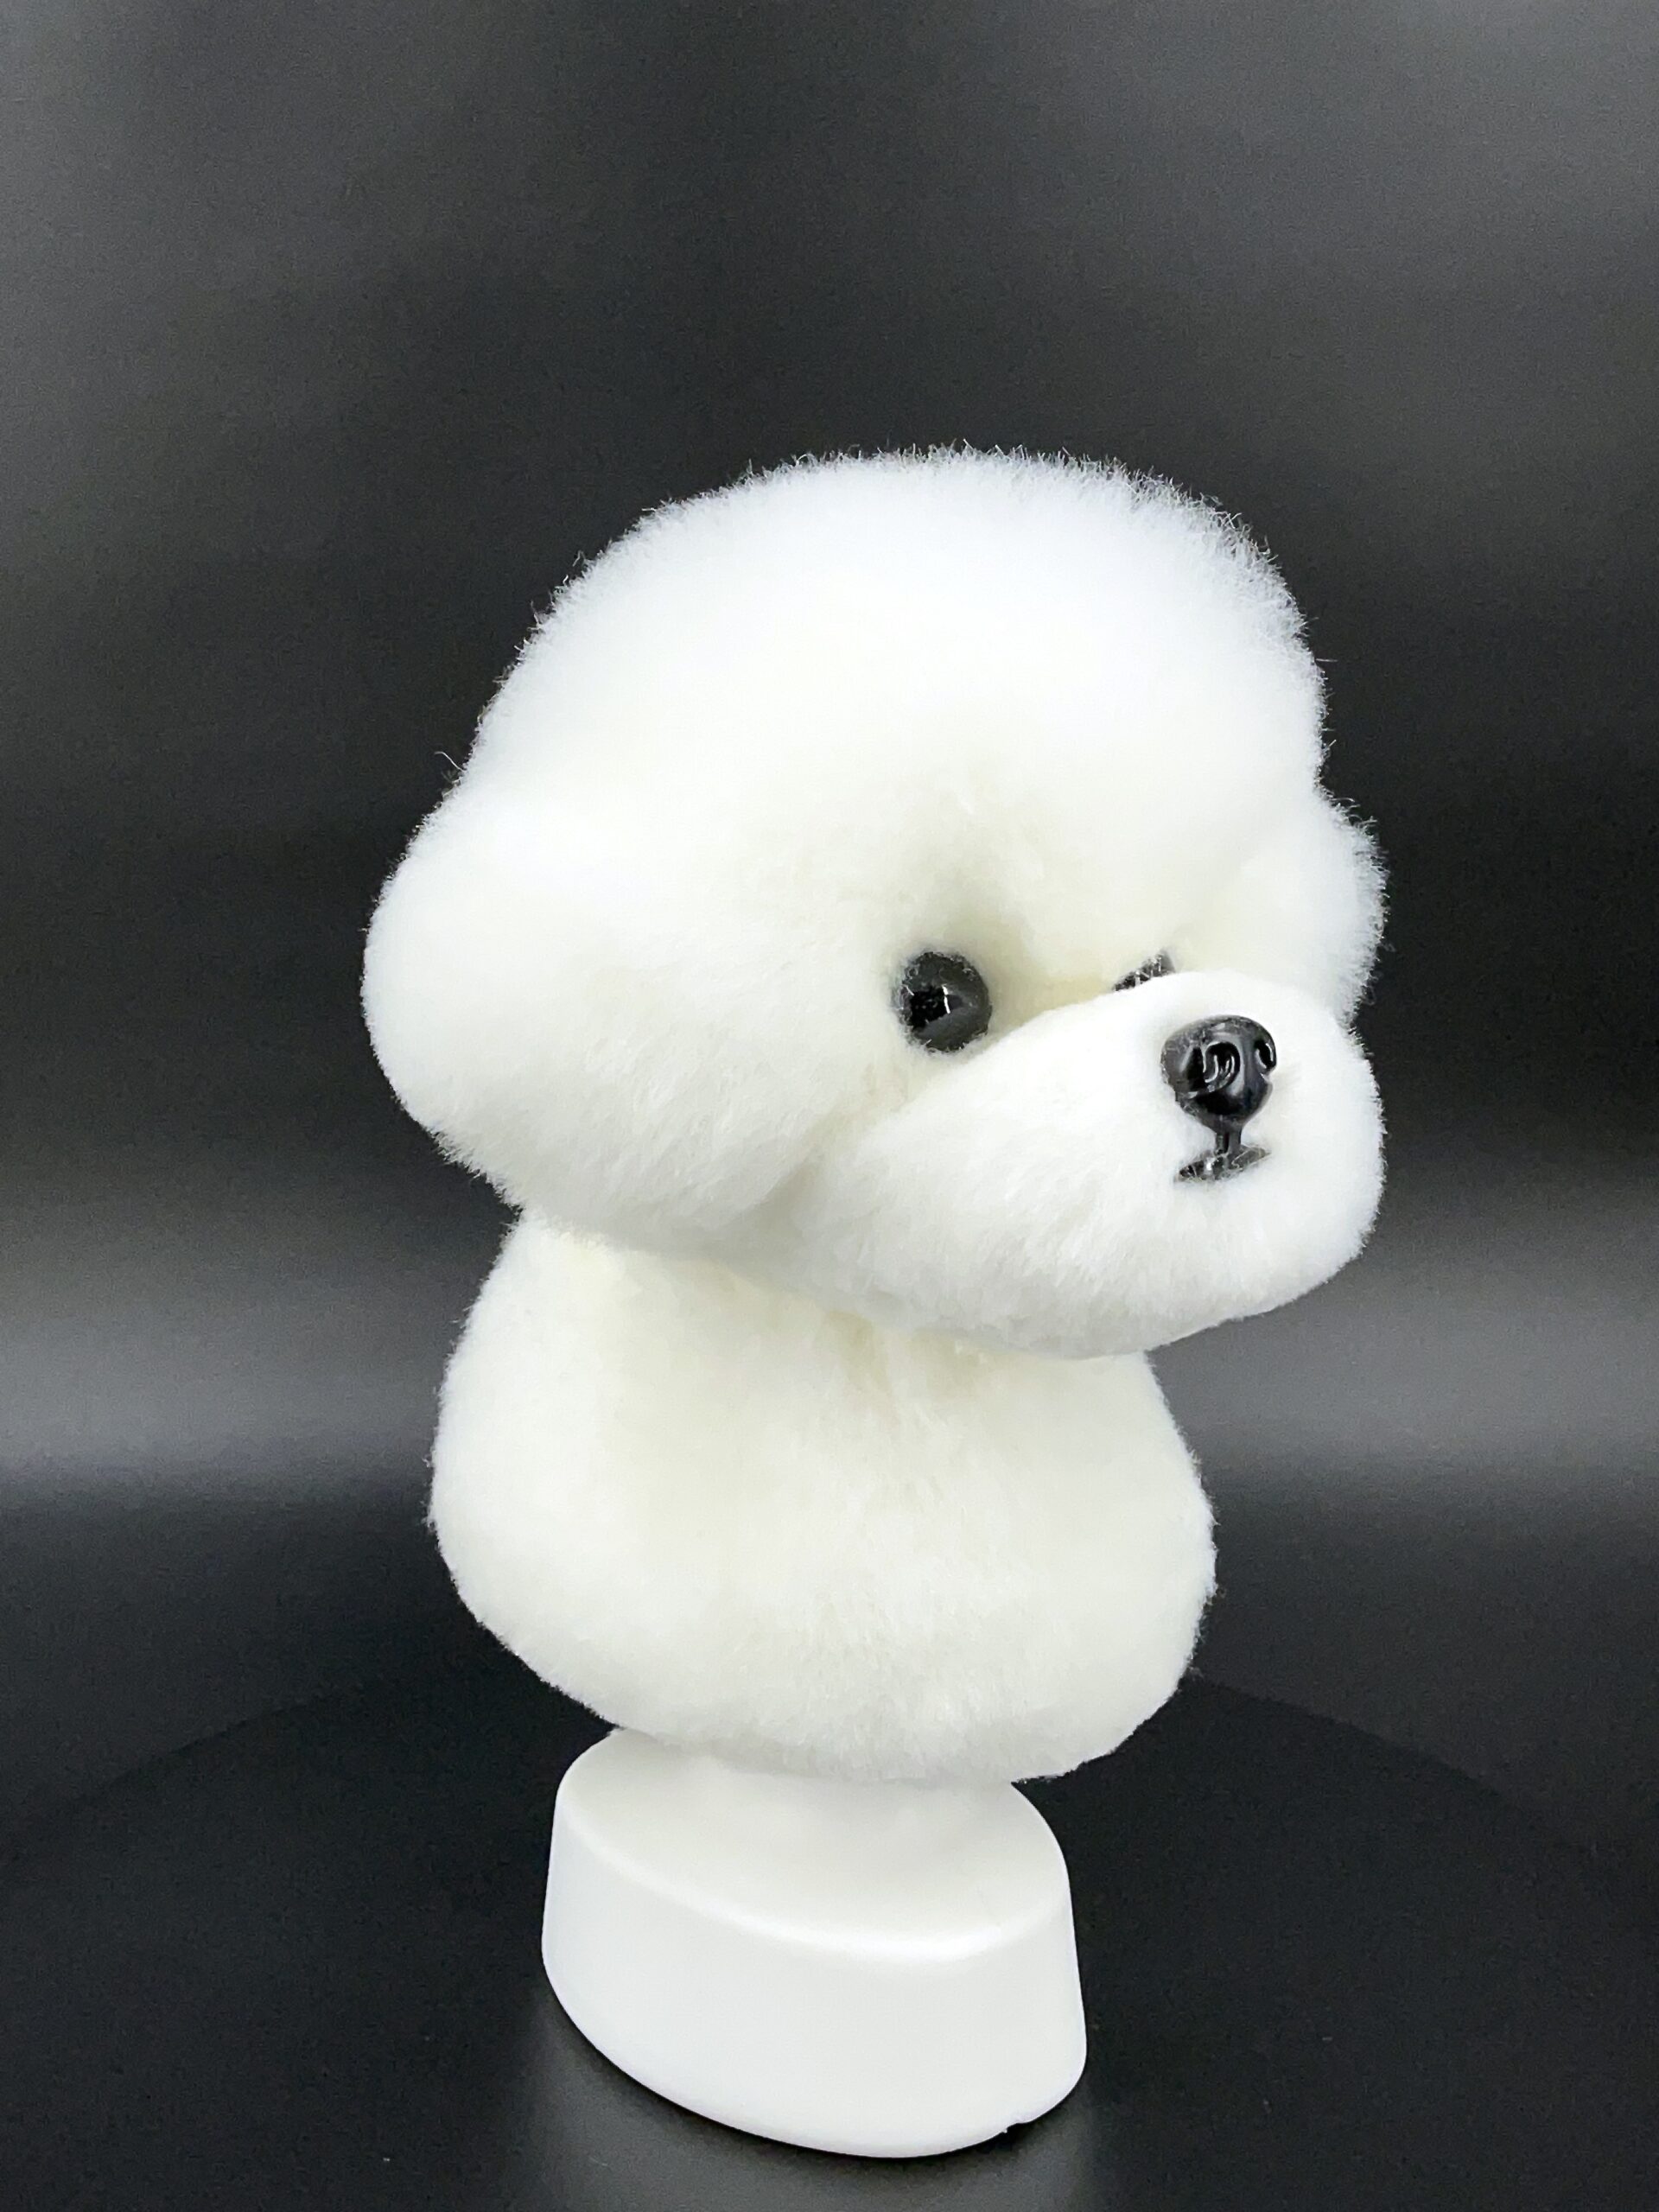 Bichon Frise Show Dog showcase at a competition in 2021